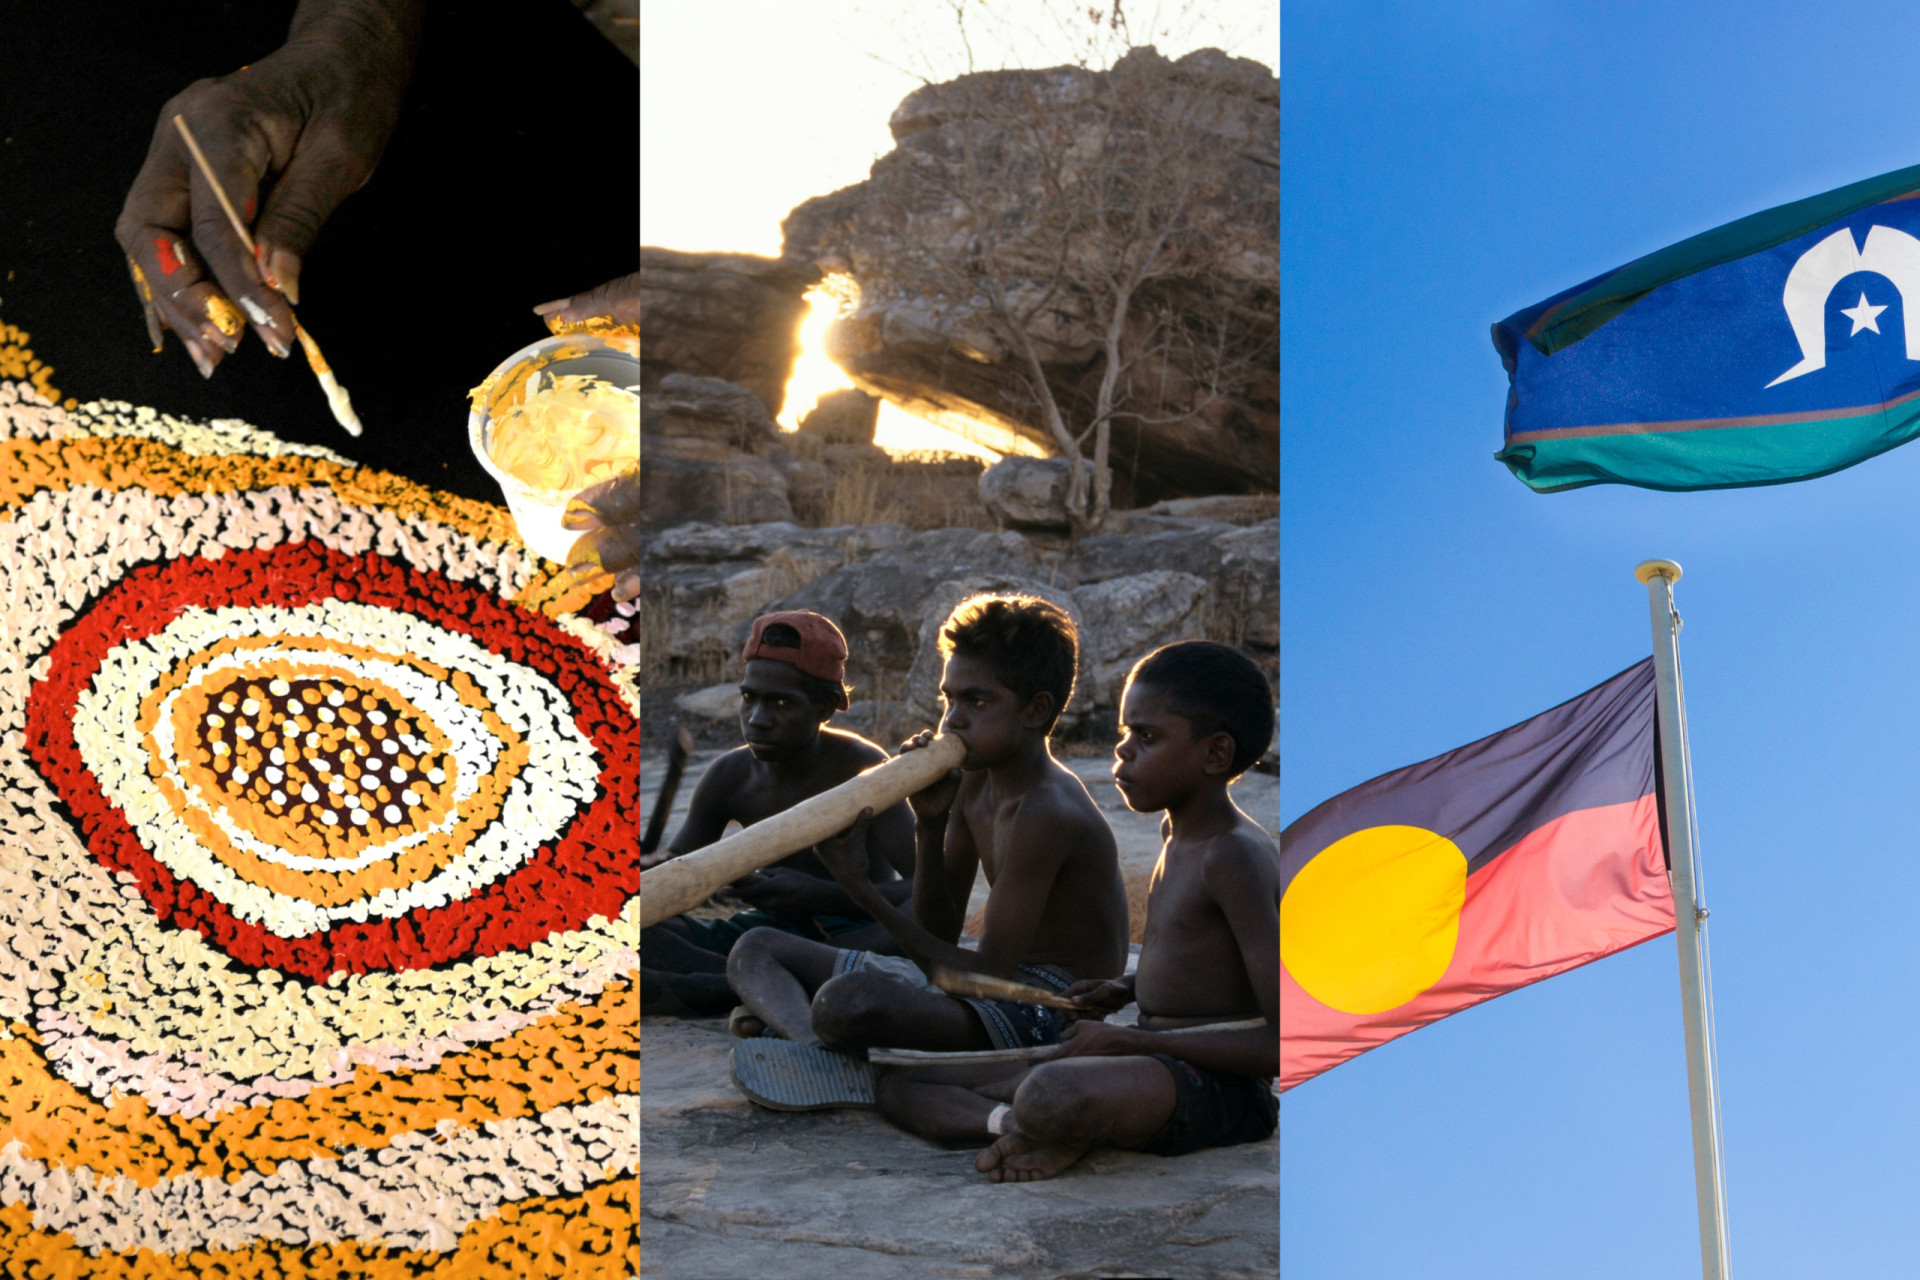 <p>Australia is home to some of the world's oldest civilizations. More specifically, we're talking about the Aboriginal and Torres Strait Islander groups. Despite James Cook's claims that <a href="https://www.starsinsider.com/travel/265679/australias-most-colourful-places" rel="noopener">Australia</a>, as we know it today, belonged to "no one," Indigenous people had existed there for tens of thousands of years before European colonization. The culture of Aboriginal and Torres Strait Islander groups is rich and diverse and continues to shape the nation's identity today.</p> <p>But how much do you know about the culture and traditions of the first people of Australia? This gallery covers everything from bush tucker to ceremonies. Click on to discover more.</p><p>You may also like:<a href="https://www.starsinsider.com/n/96907?utm_source=msn.com&utm_medium=display&utm_campaign=referral_description&utm_content=722683en-us"> How do photographers capture those priceless shots?</a></p>